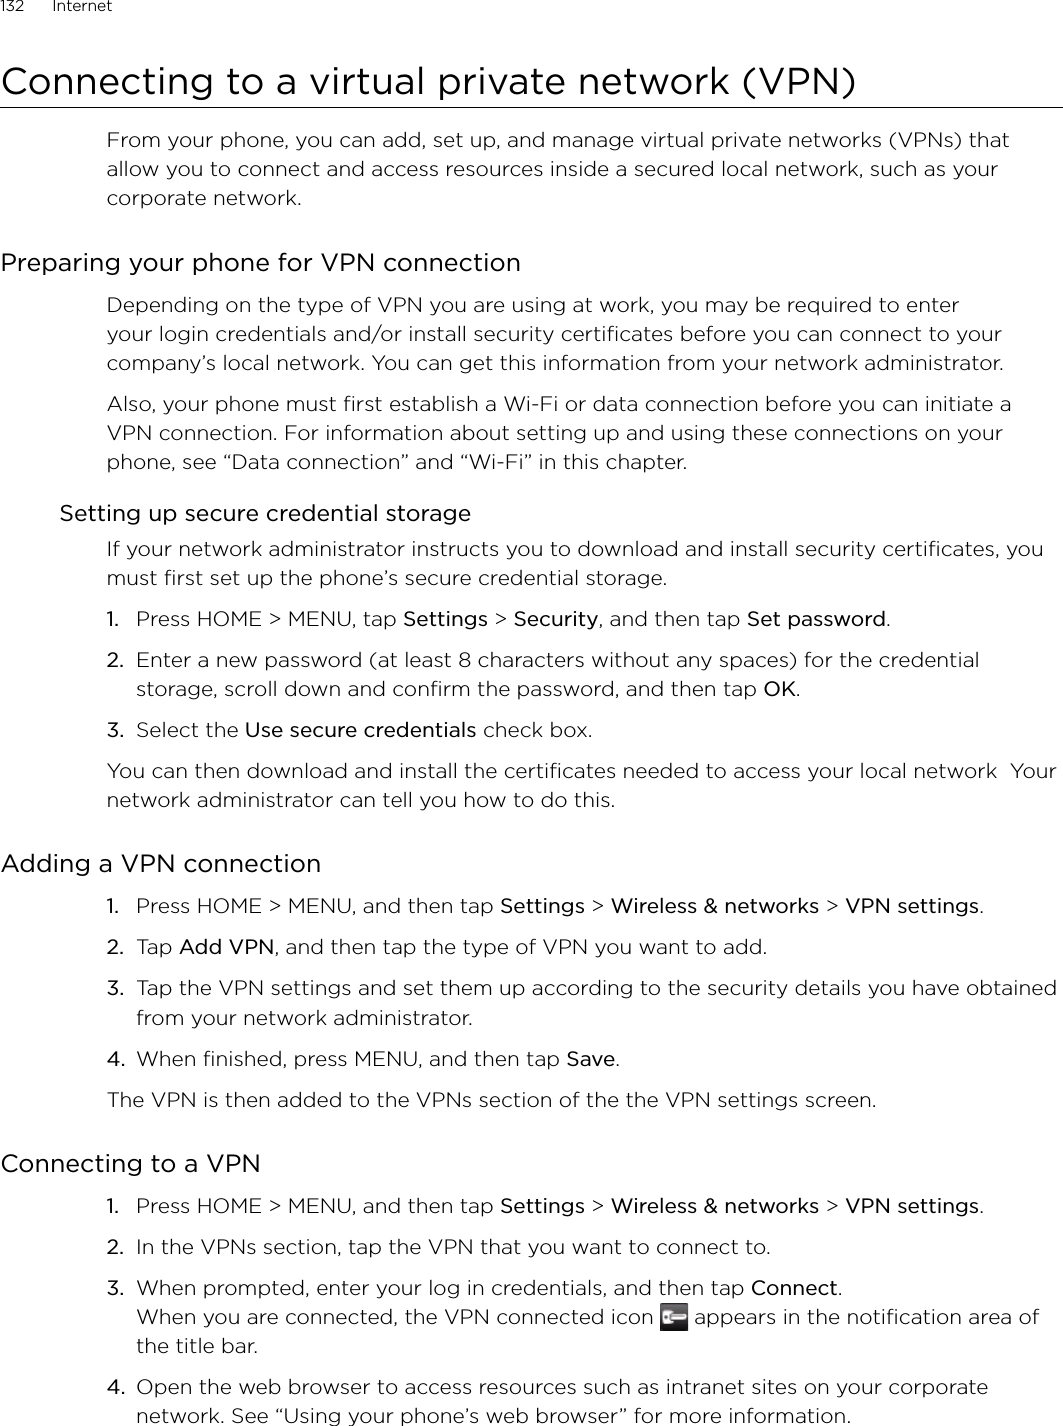 132      Internet      Connecting to a virtual private network (VPN)From your phone, you can add, set up, and manage virtual private networks (VPNs) that allow you to connect and access resources inside a secured local network, such as your corporate network.Preparing your phone for VPN connectionDepending on the type of VPN you are using at work, you may be required to enter your login credentials and/or install security certificates before you can connect to your company’s local network. You can get this information from your network administrator. Also, your phone must first establish a Wi-Fi or data connection before you can initiate a VPN connection. For information about setting up and using these connections on your phone, see “Data connection” and “Wi-Fi” in this chapter.Setting up secure credential storageIf your network administrator instructs you to download and install security certificates, you must first set up the phone’s secure credential storage.Press HOME &gt; MENU, tap Settings &gt; Security, and then tap Set password.Enter a new password (at least 8 characters without any spaces) for the credential storage, scroll down and confirm the password, and then tap OK.Select the Use secure credentials check box.You can then download and install the certificates needed to access your local network  Your network administrator can tell you how to do this.Adding a VPN connectionPress HOME &gt; MENU, and then tap Settings &gt; Wireless &amp; networks &gt; VPN settings.Tap Add VPN, and then tap the type of VPN you want to add.Tap the VPN settings and set them up according to the security details you have obtained from your network administrator.When finished, press MENU, and then tap Save.The VPN is then added to the VPNs section of the the VPN settings screen.Connecting to a VPNPress HOME &gt; MENU, and then tap Settings &gt; Wireless &amp; networks &gt; VPN settings.In the VPNs section, tap the VPN that you want to connect to.When prompted, enter your log in credentials, and then tap Connect. When you are connected, the VPN connected icon   appears in the notification area of the title bar.Open the web browser to access resources such as intranet sites on your corporate network. See “Using your phone’s web browser” for more information.1.2.3.1.2.3.4.1.2.3.4.